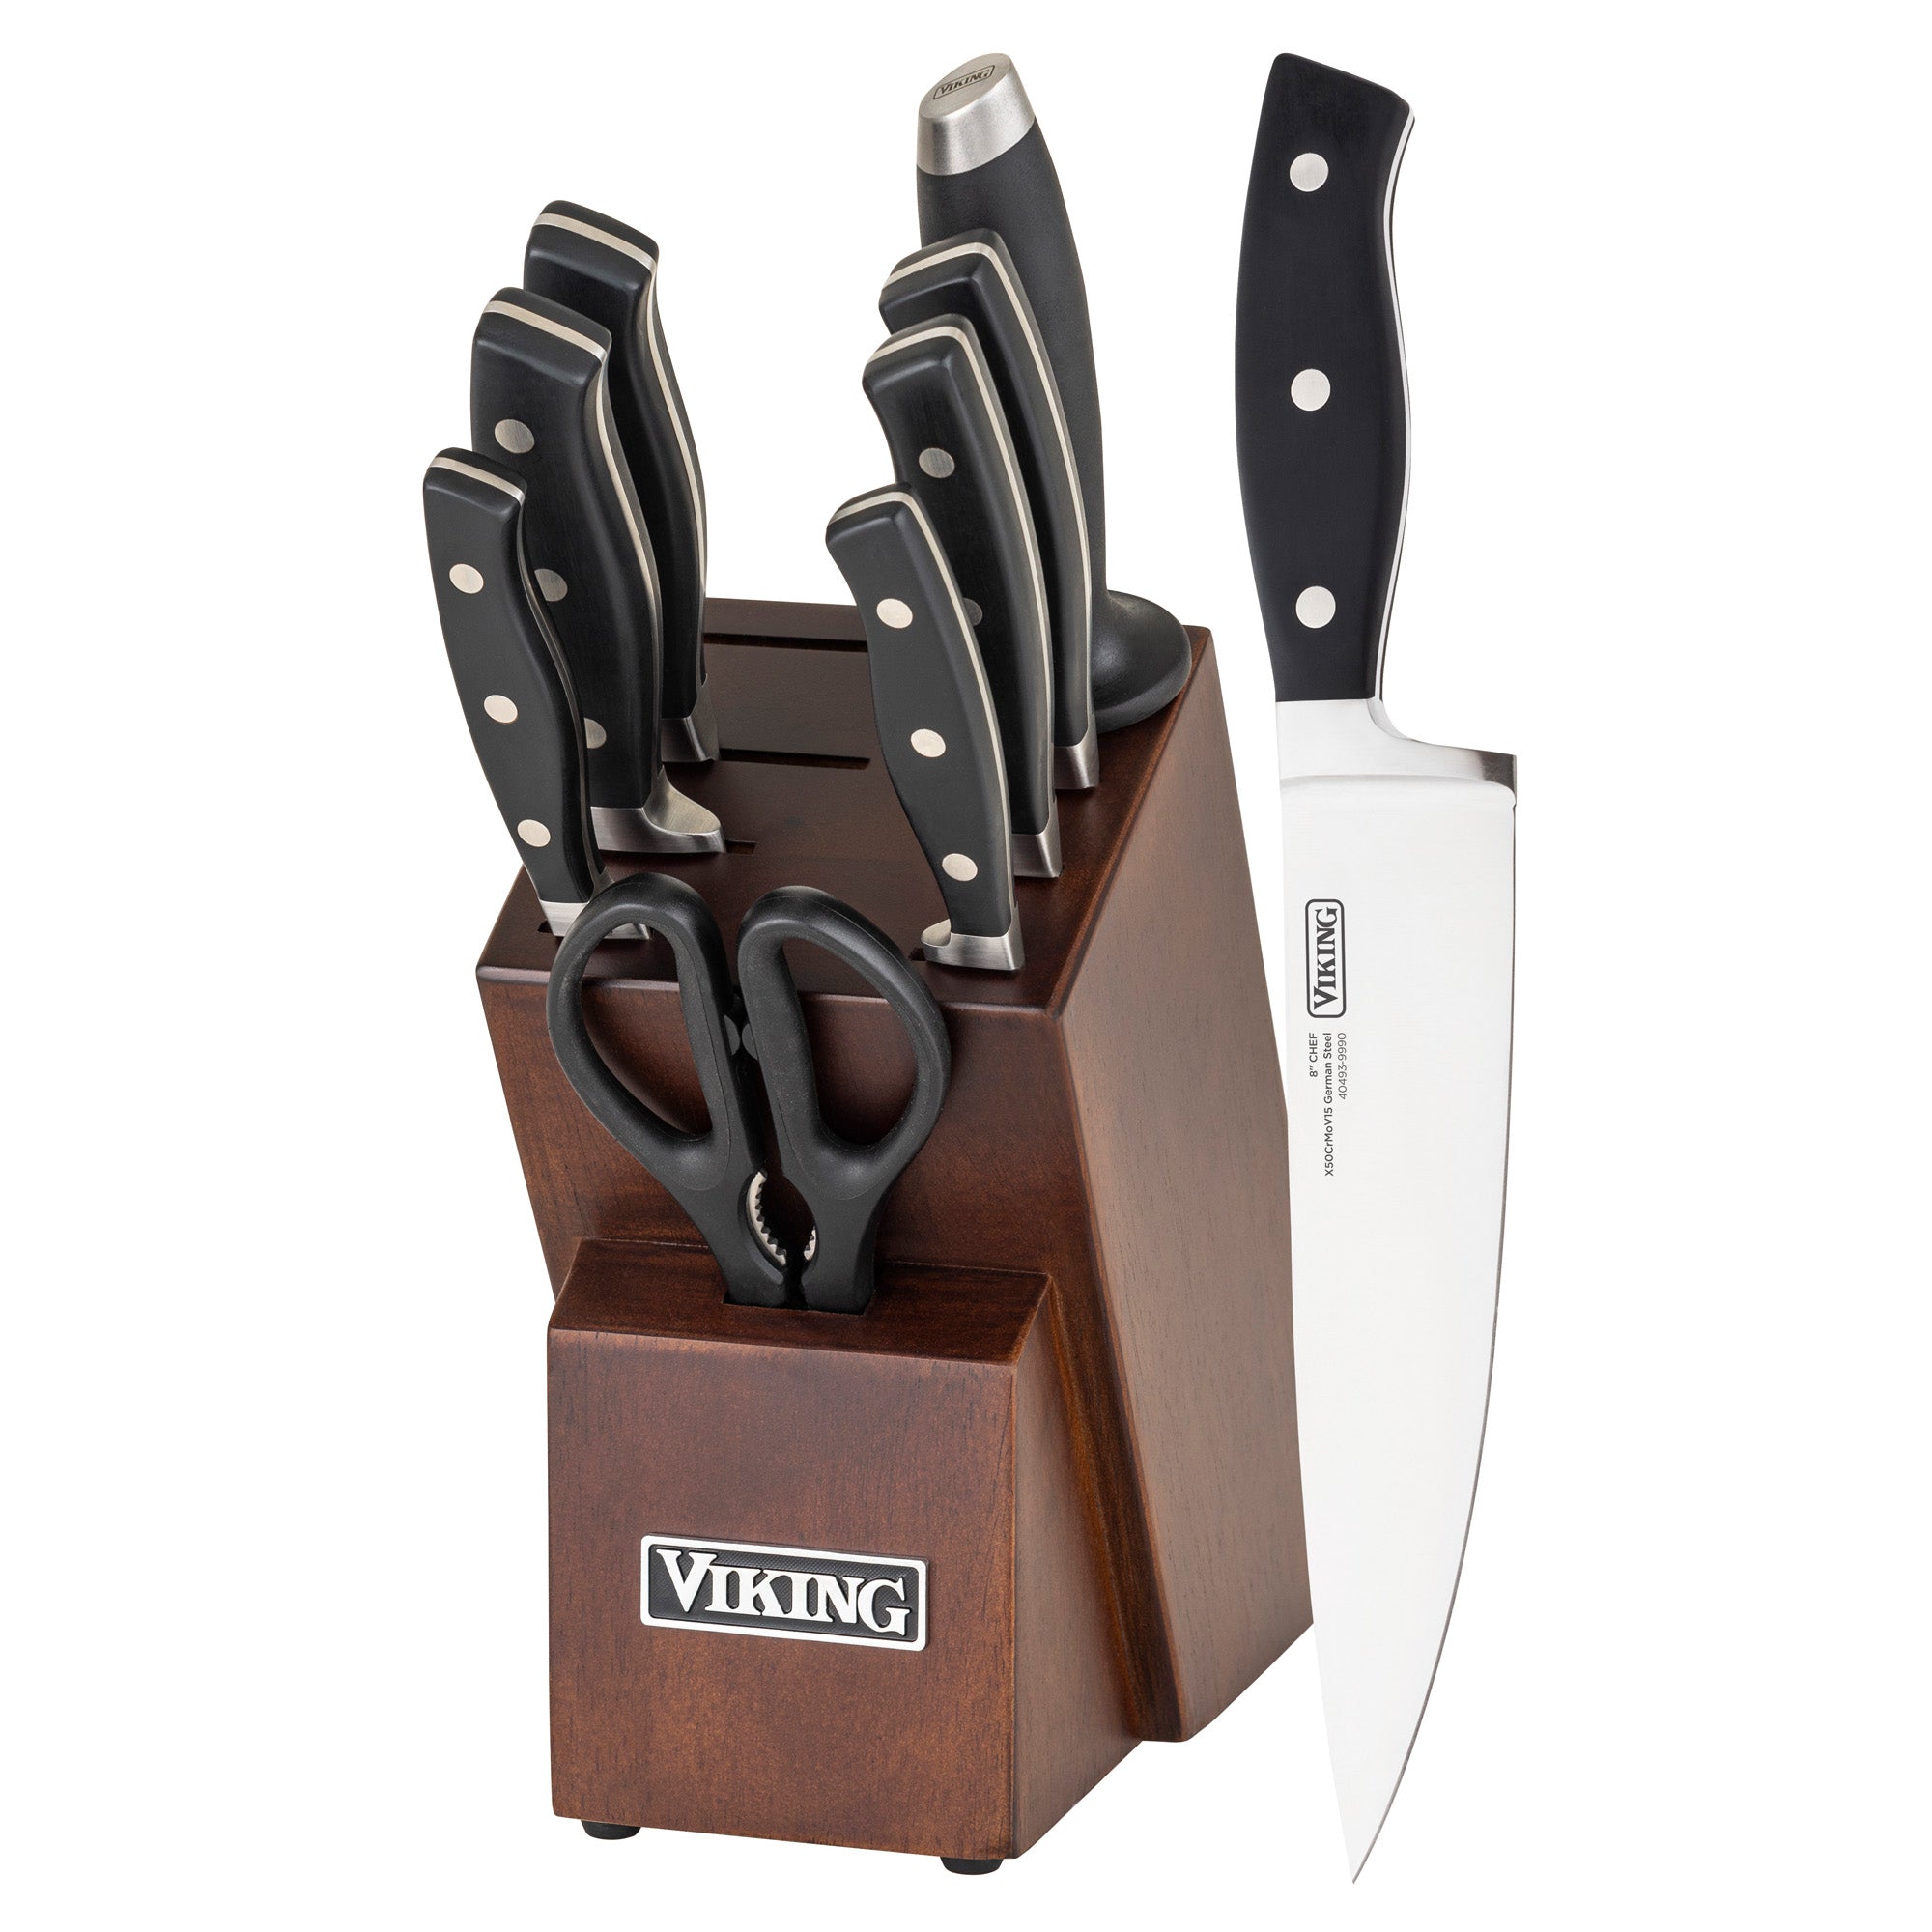 Viking 10-piece True Forged Cutlery Set with Block